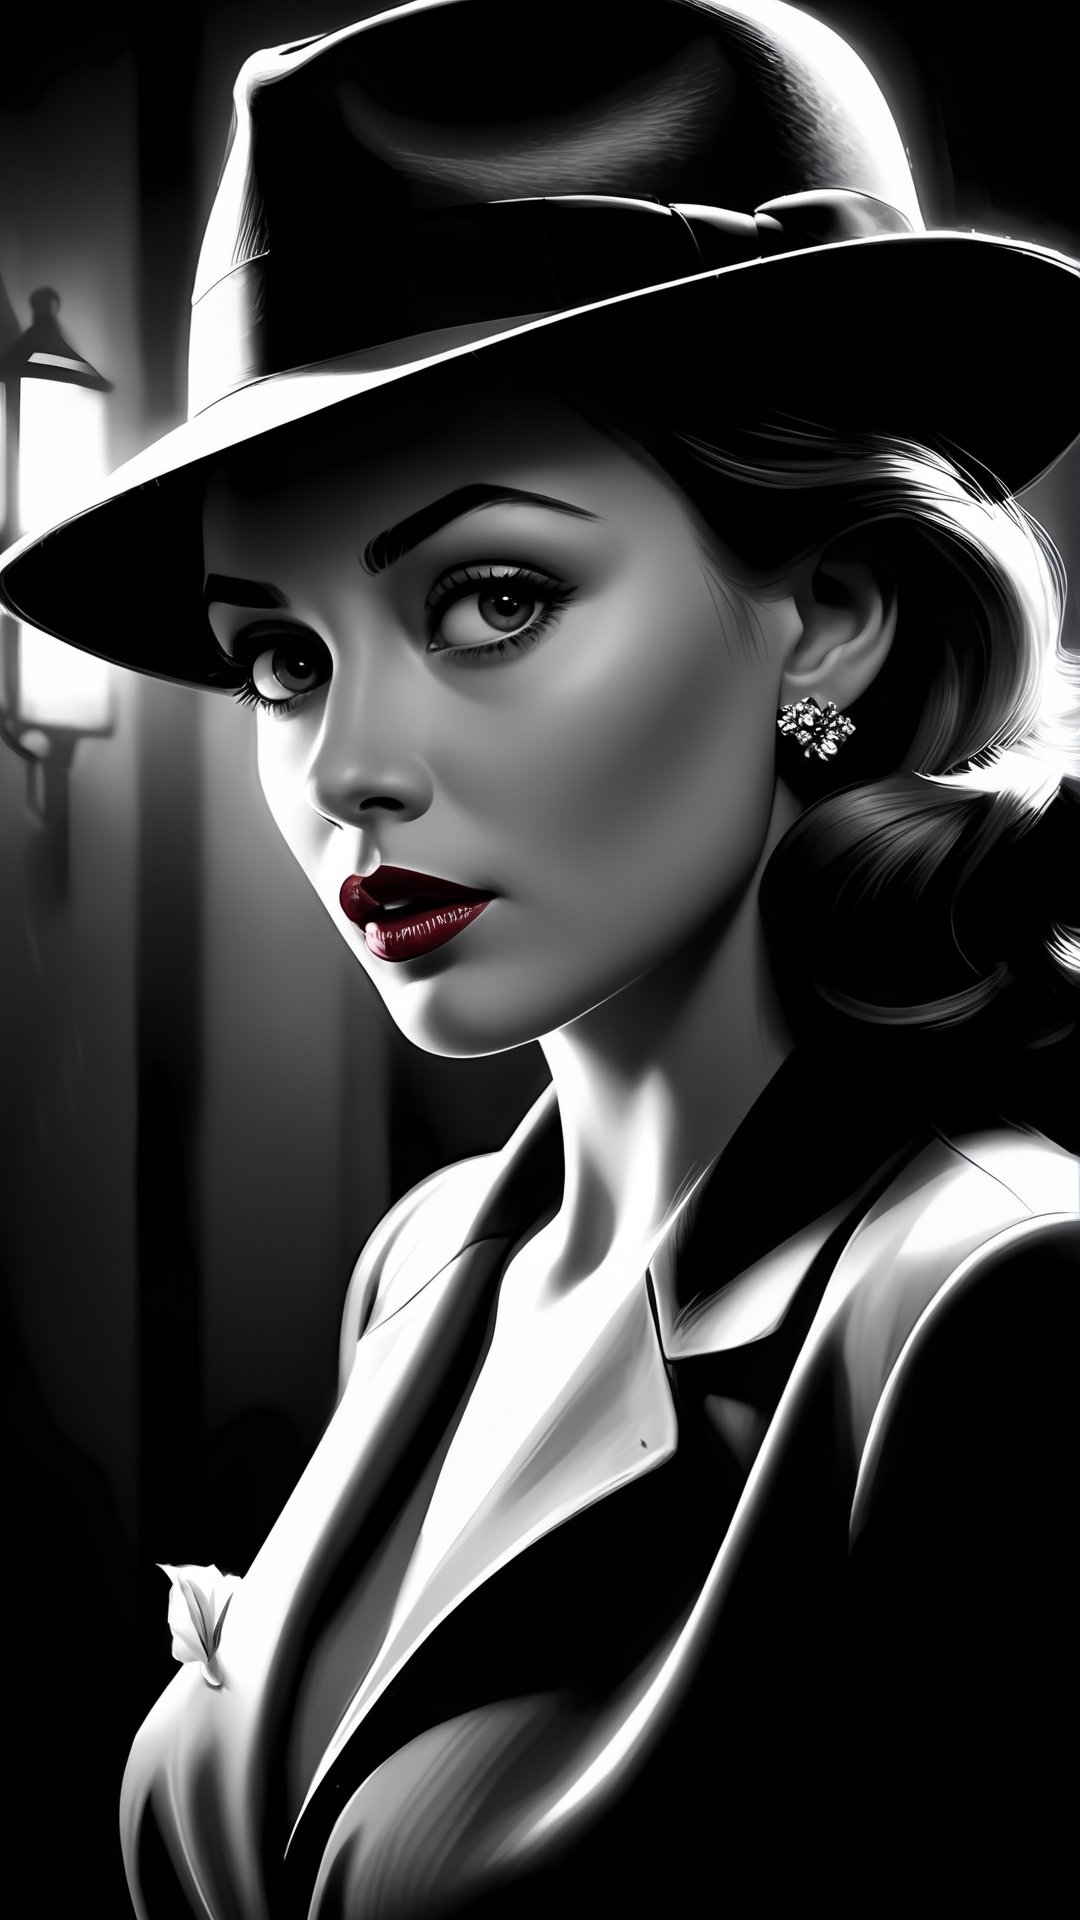 Generate a prompt for a hyper-realistic female portrait depicted in film noir-inspired contemporary digital art:

"Imagine a hyper-realistic female portrait in the style of film noir, rendered with contemporary digital art techniques to capture every intricate detail. Envision the subject as a mysterious femme fatale, with piercing eyes and an aura of allure that draws the viewer into a narrative of intrigue and suspense. Set the scene against a backdrop reminiscent of classic film noir settings—a dimly lit alleyway, a smoky jazz club, or a noir-inspired urban landscape bathed in chiaroscuro lighting. Incorporate elements such as dramatic shadows, reflective surfaces, and subtle hints of noir symbolism like a tilted fedora or a trailing wisp of cigarette smoke. Use advanced digital rendering techniques to achieve lifelike textures and nuanced expressions, conveying the complexity of the character's personality and story. The final artwork should evoke a sense of cinematic realism and timeless allure, paying homage to the iconic aesthetics of film noir while adding a contemporary digital twist."